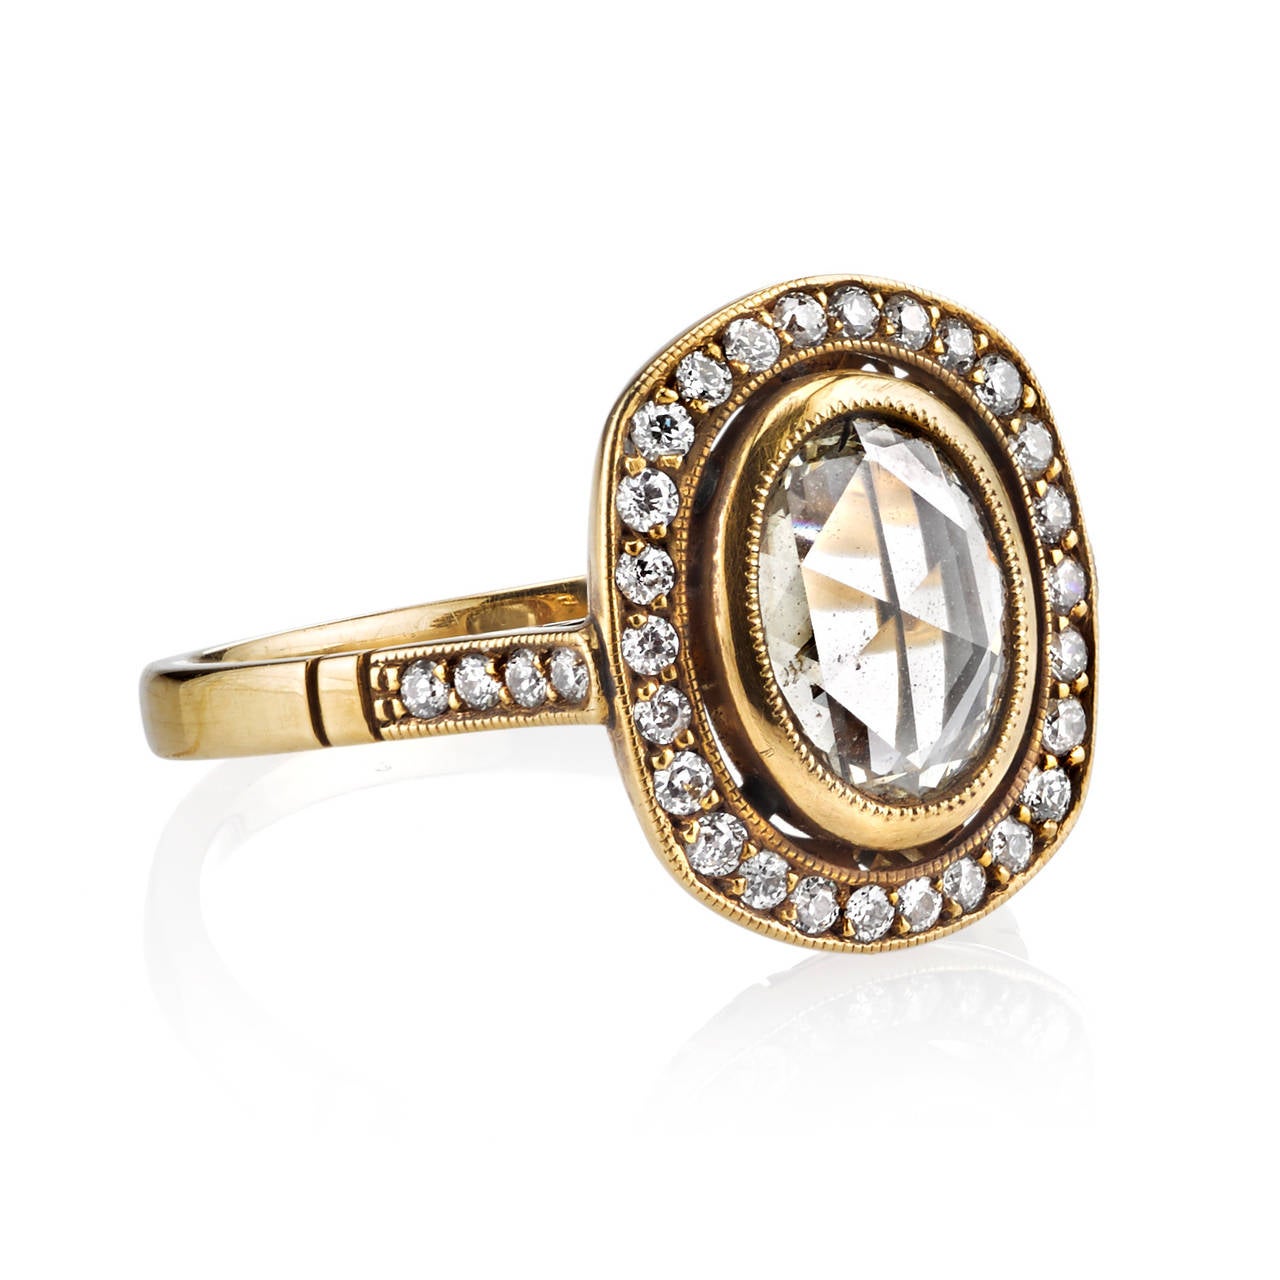 0.81ct LM/SI2 oval Rose cut diamond set in a handcrafted 18k oxidized yellow gold mounting. A halo design featuring a bezel set diamond, low profile, and intricate gallery.